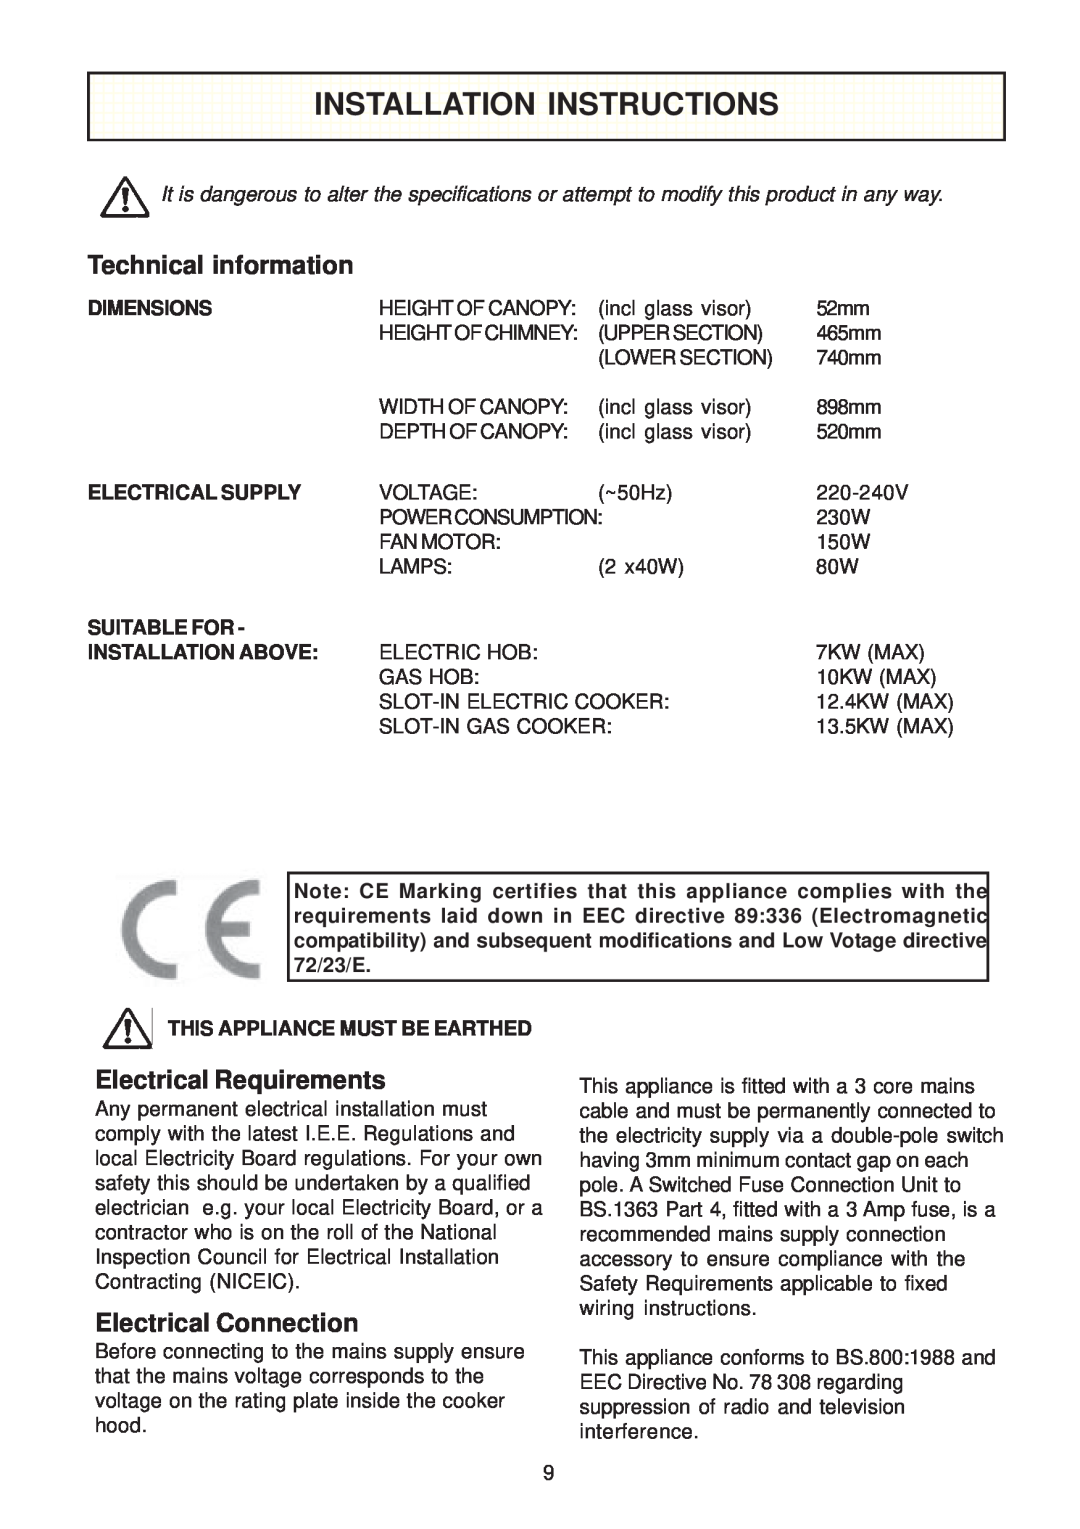 Zanussi ZHC 950 manual Installation Instructions, Technical information, Electrical Requirements, Electrical Connection 